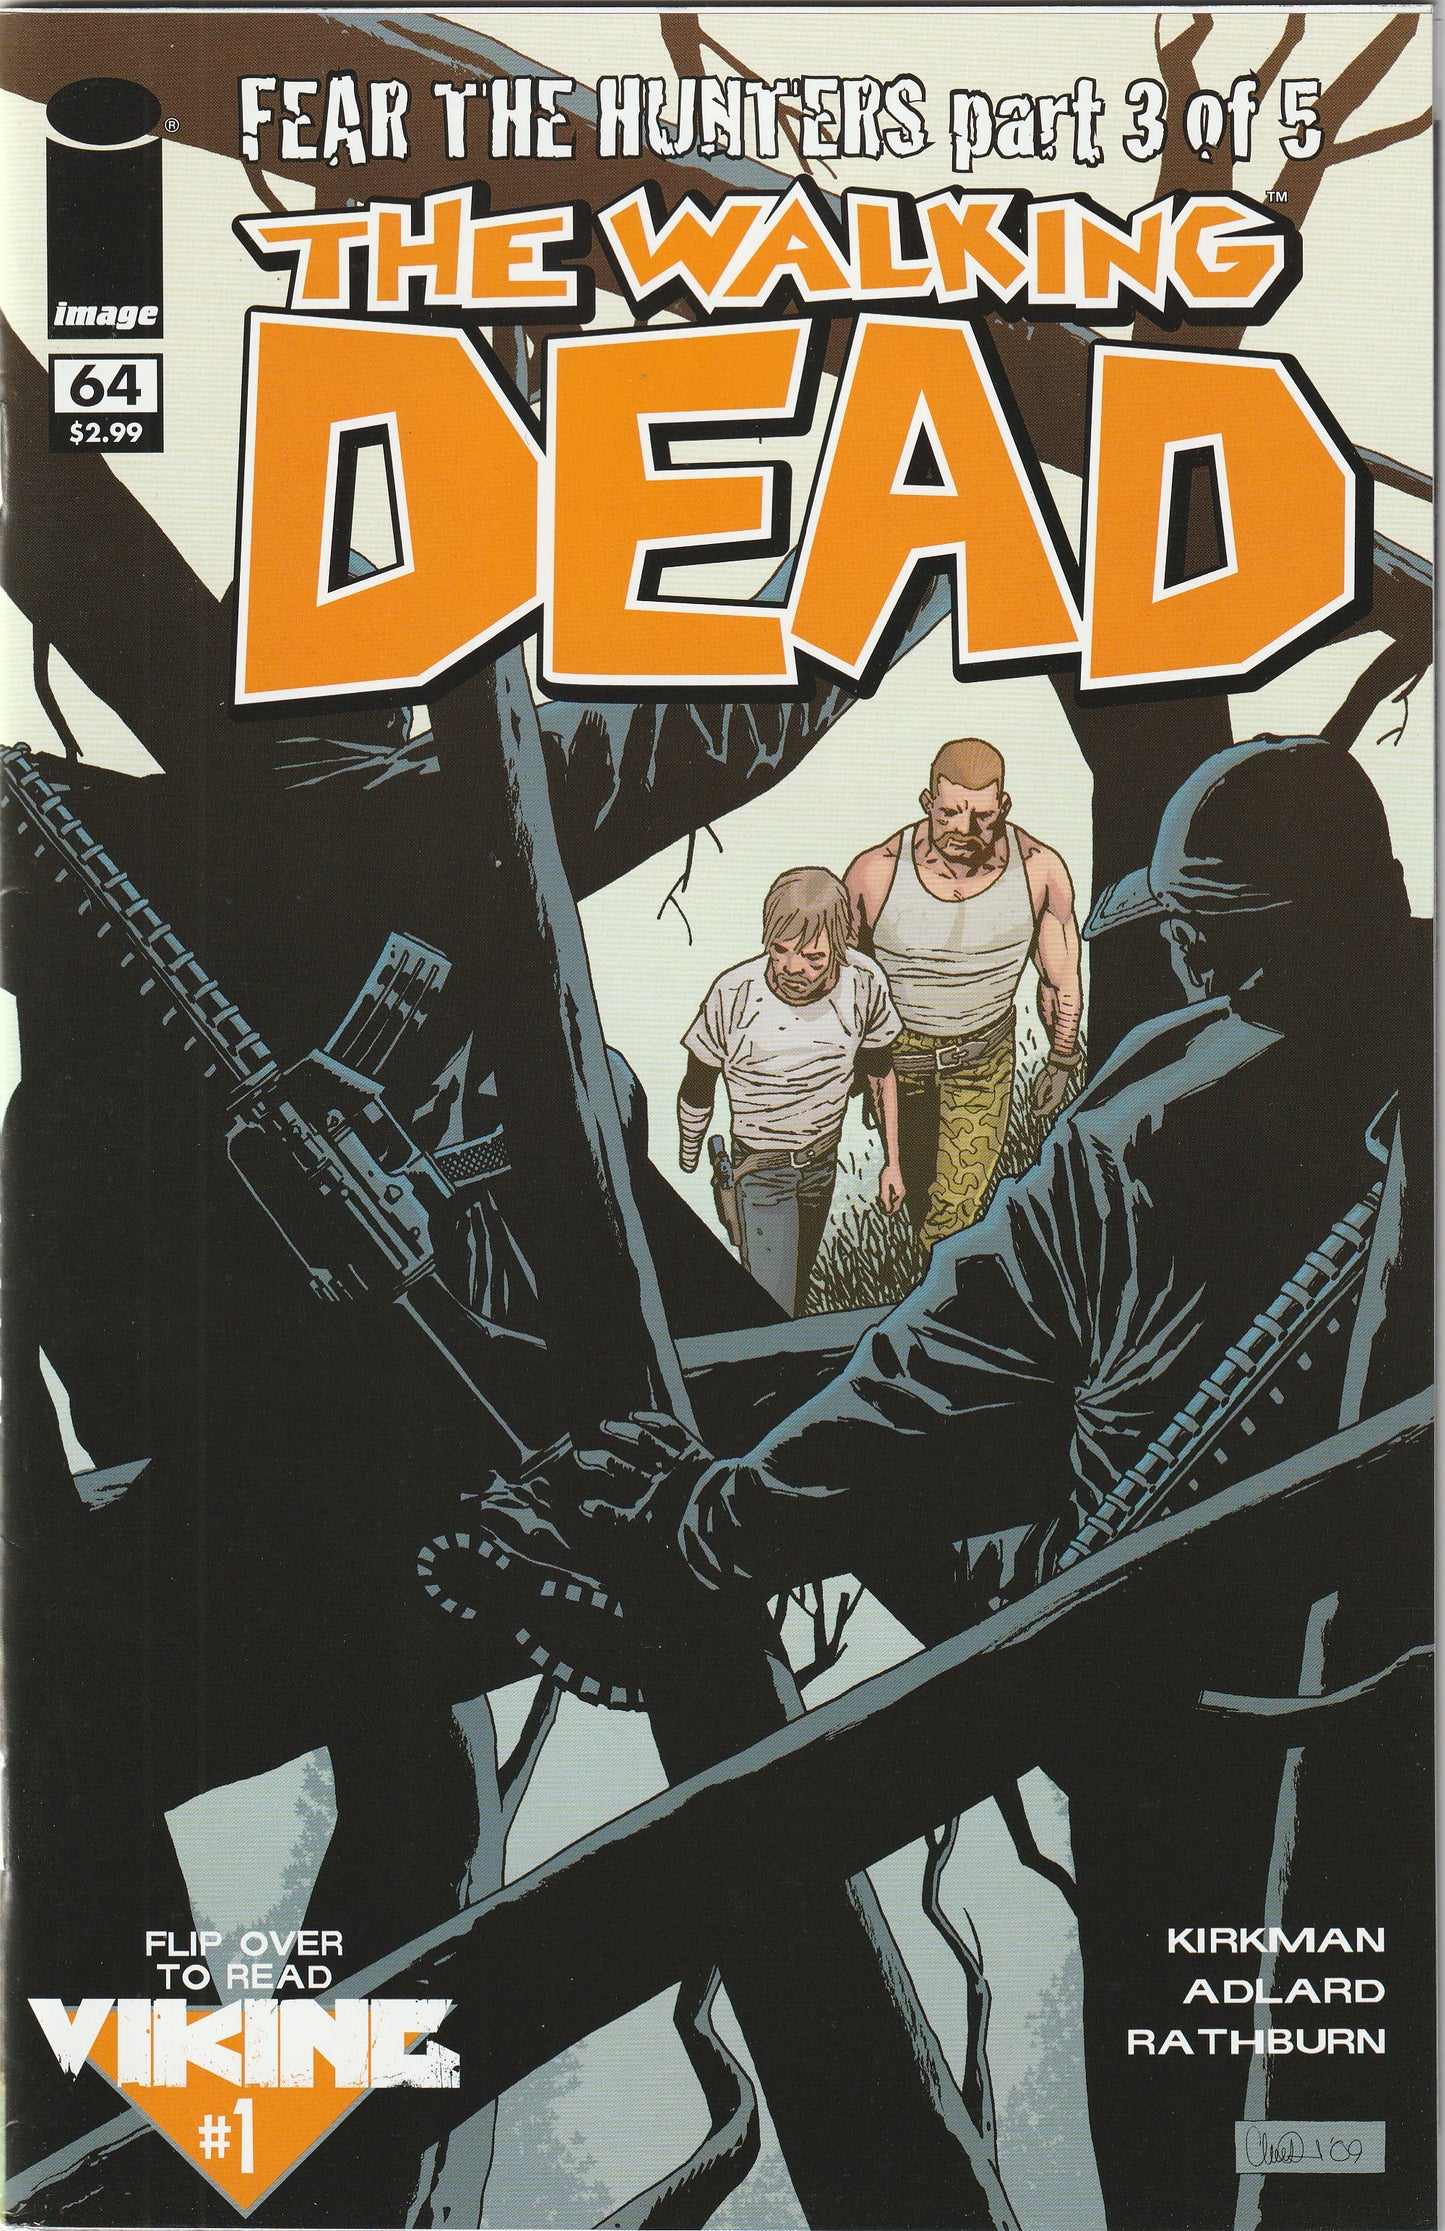 The Walking Dead #64 (2009) - Flip Book With Special Black and White Edition of Viking 1